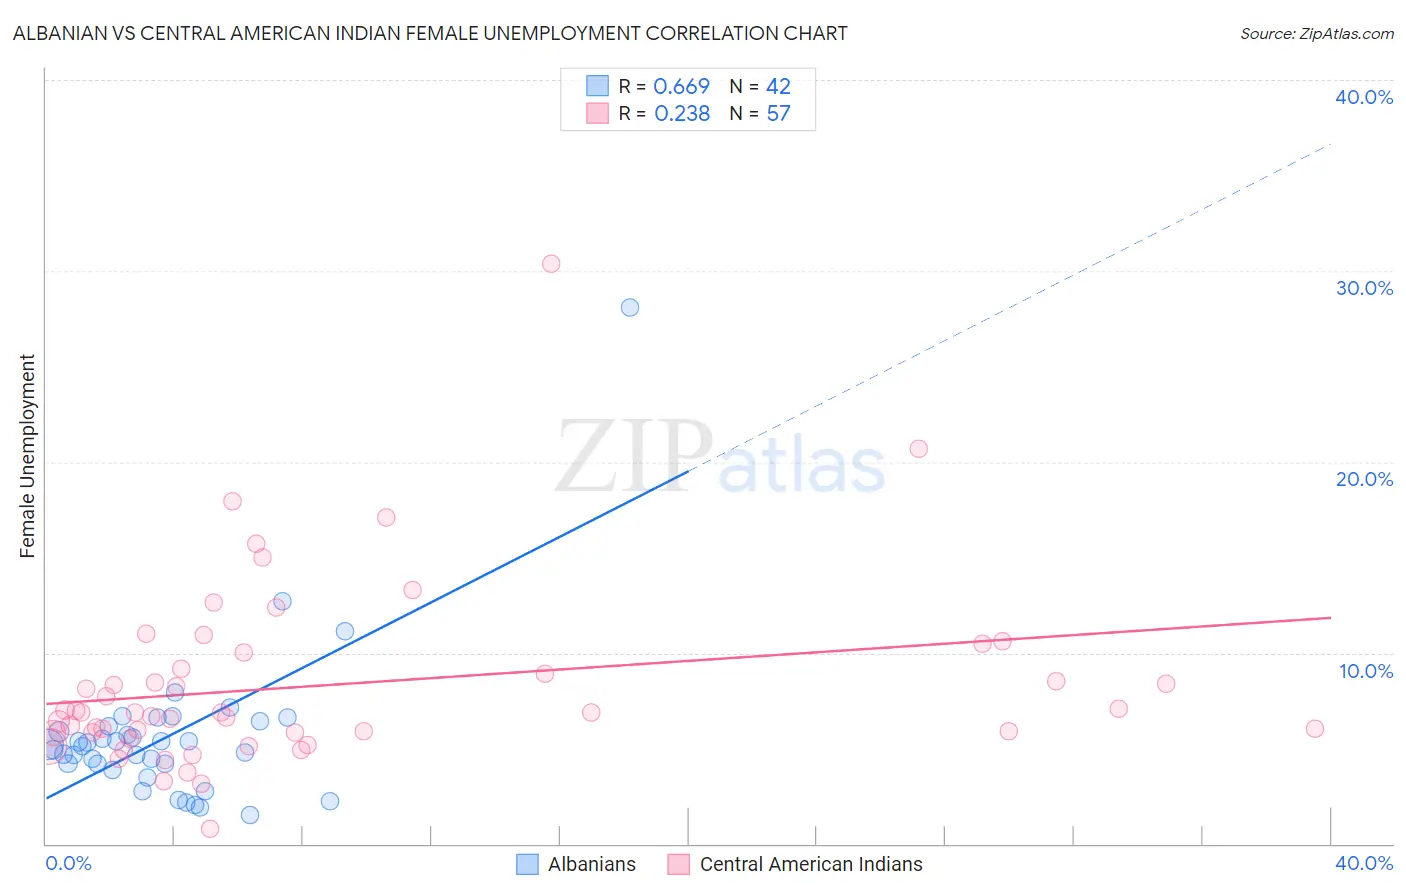 Albanian vs Central American Indian Female Unemployment